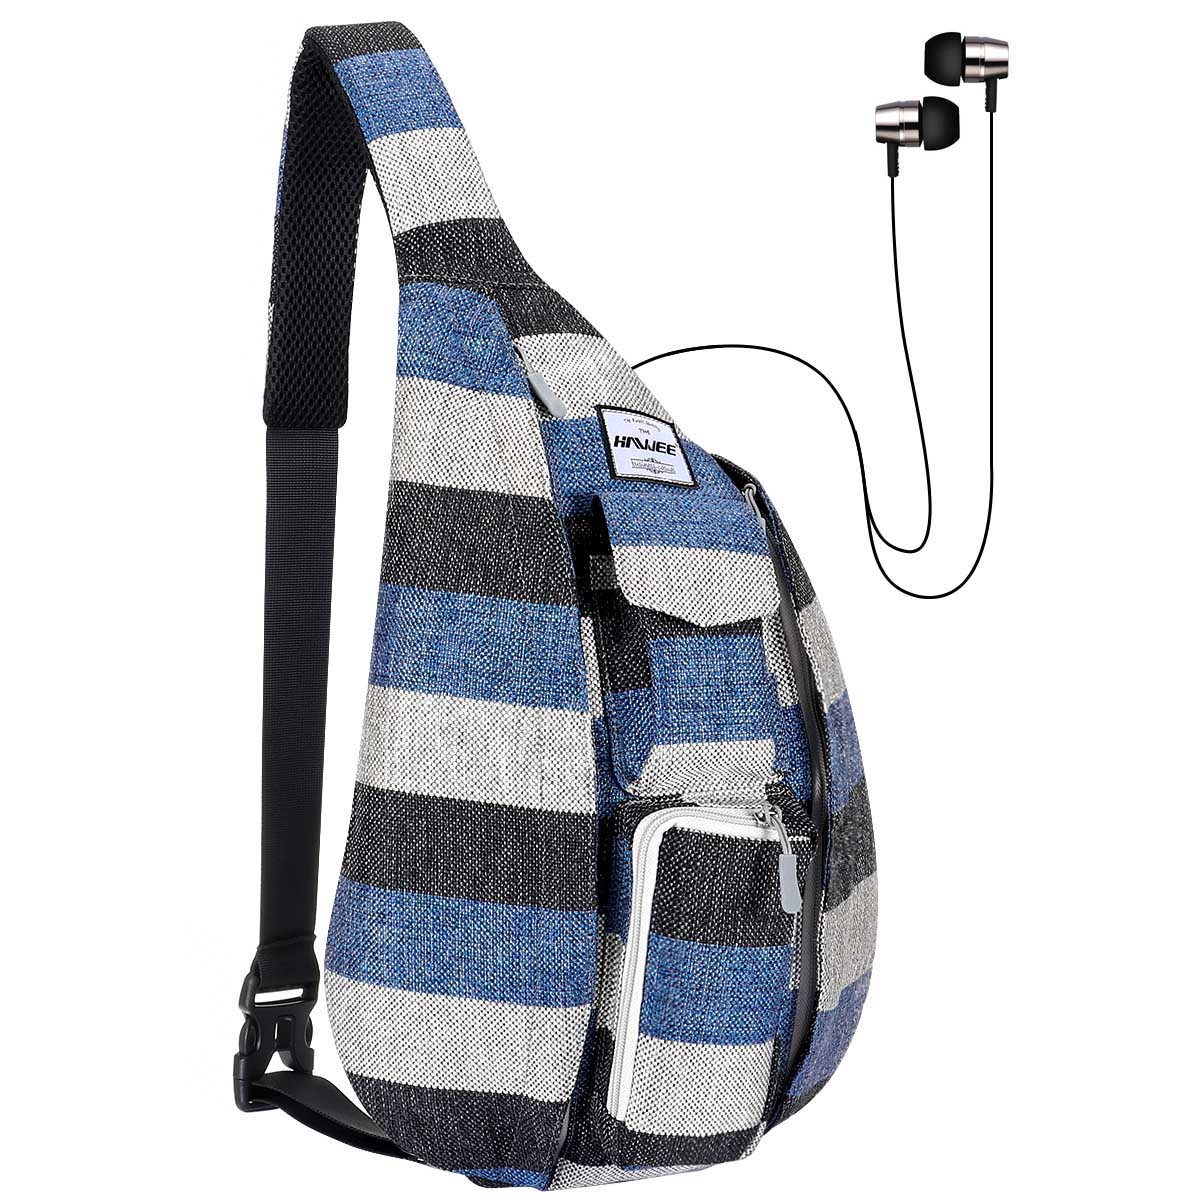 HAWEE Backpack for Women Hiking Backpack Chest Sling Bag Sports Travel Crossbody Daypack, Wide Stripes of Black/ Blue/Gray - image 1 of 7